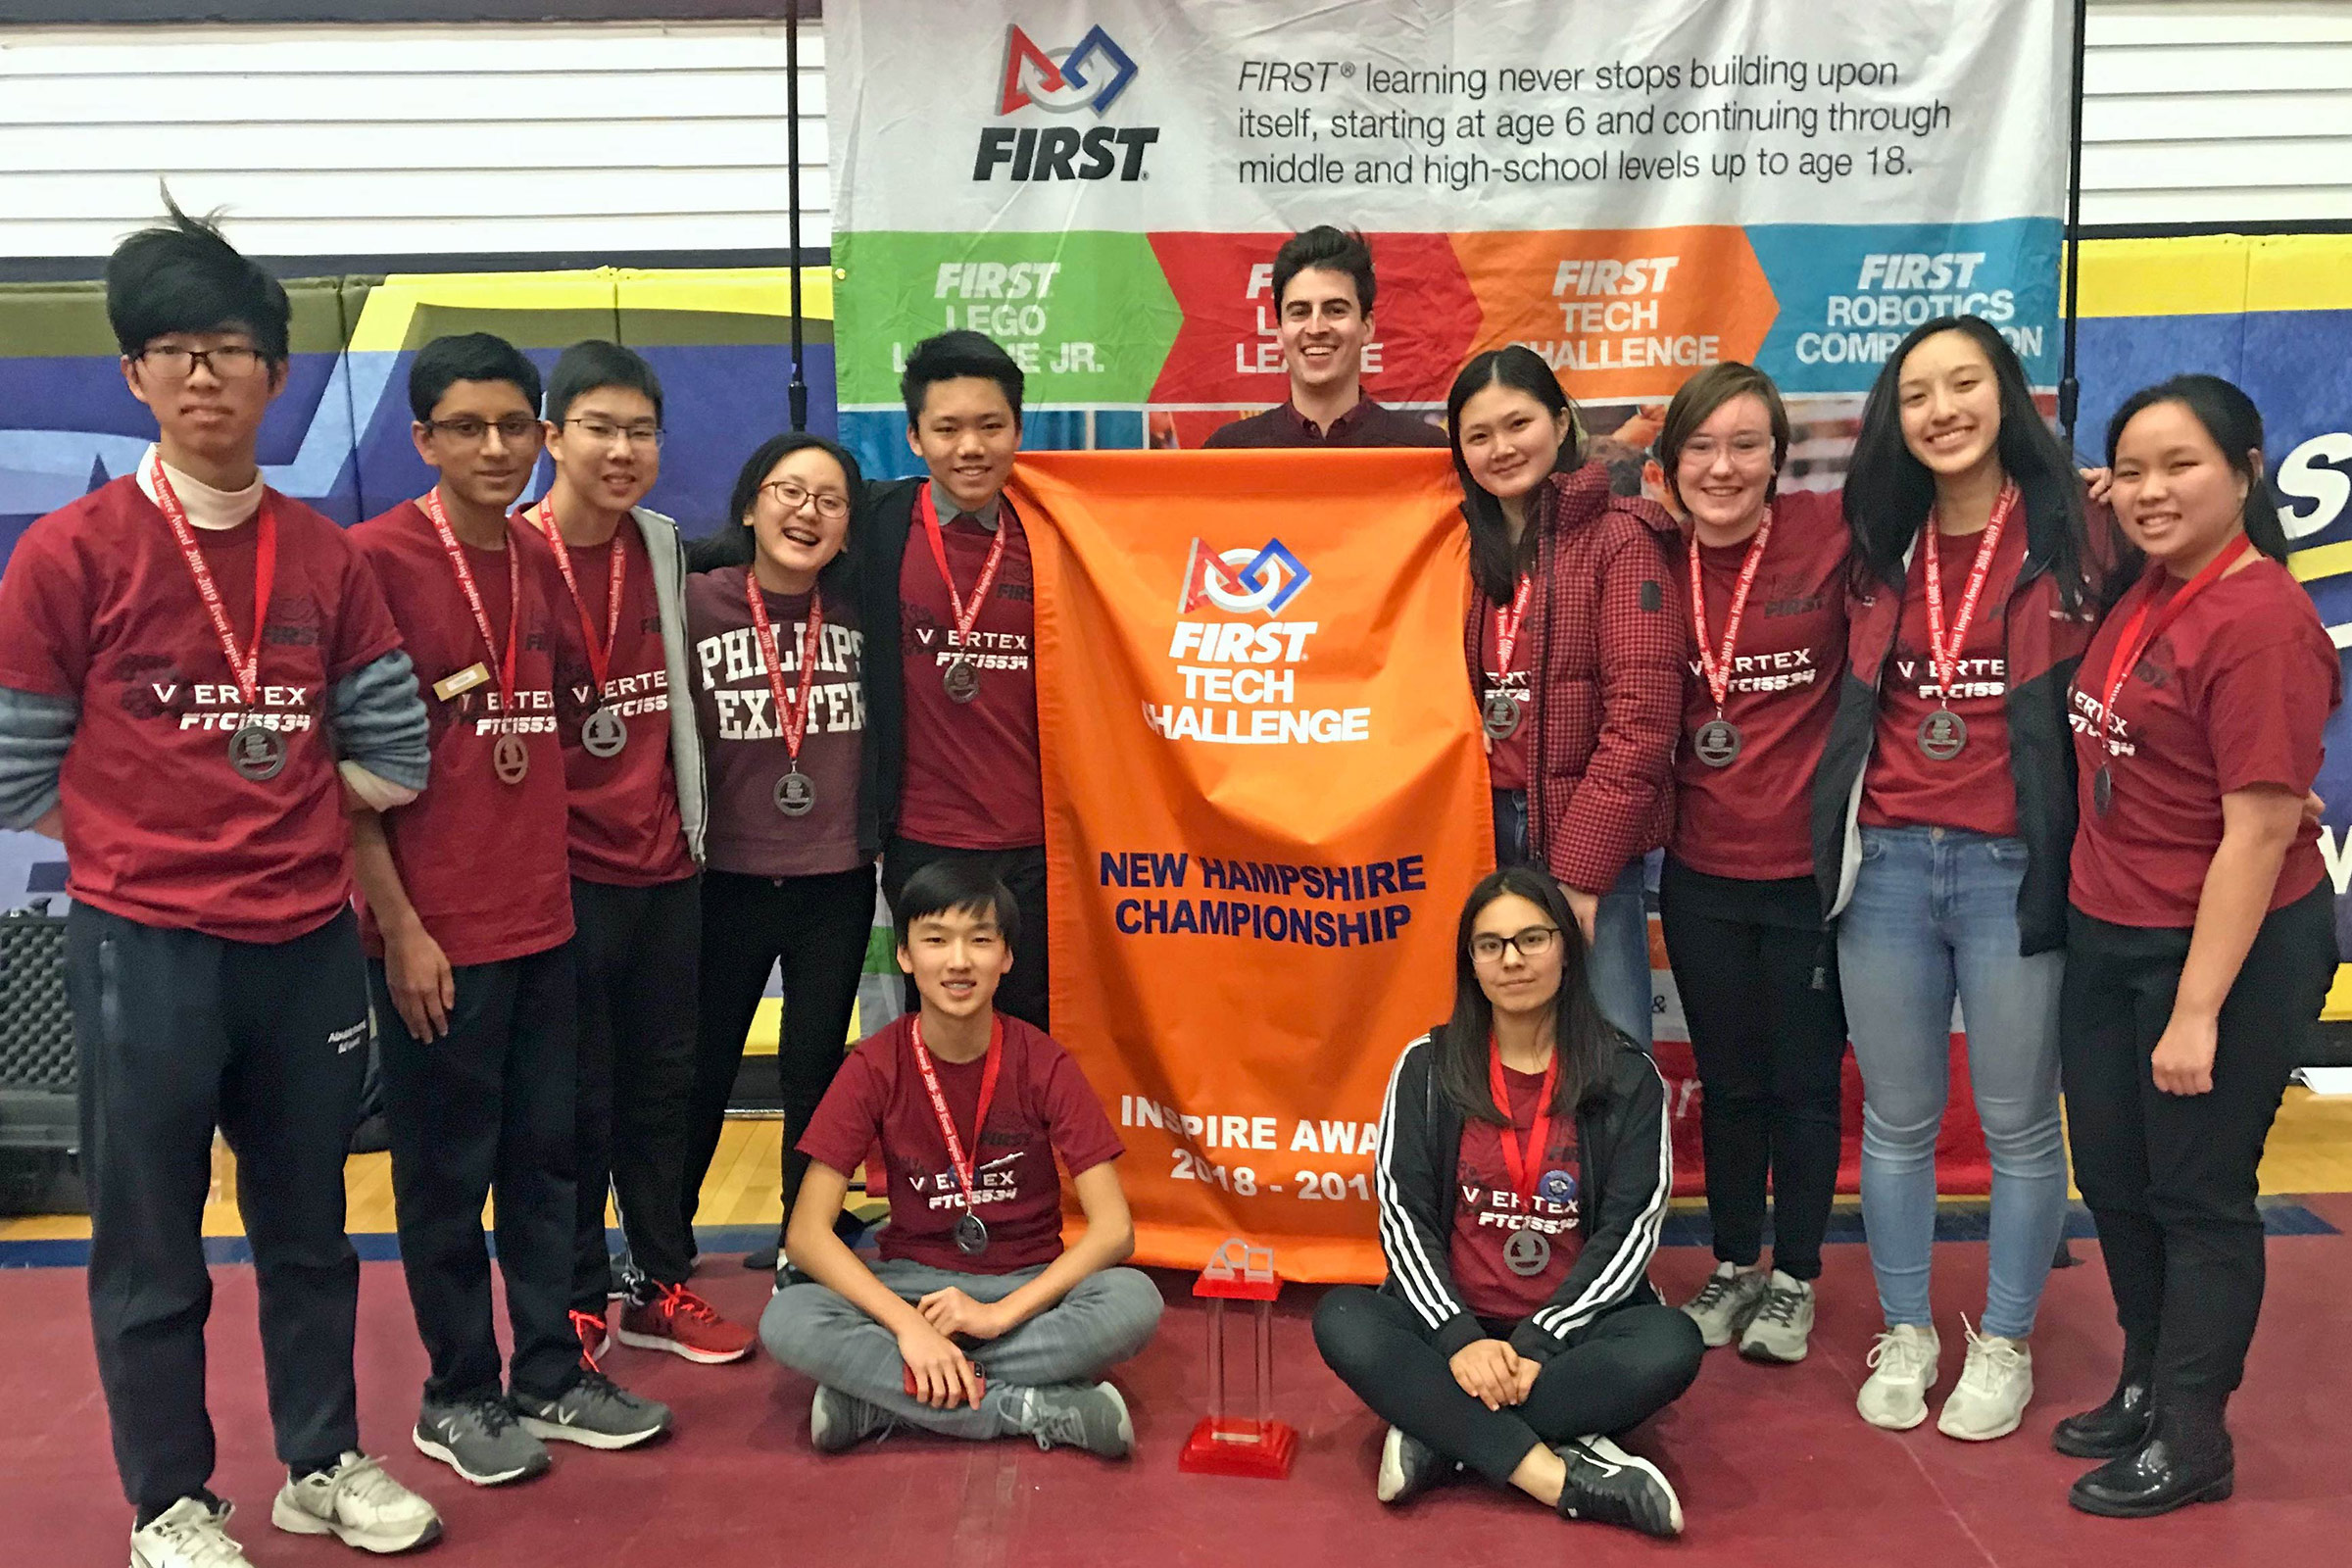 PEA’s FIRST Tech Challenge robotics team at the state championships, where they won the “Inspire” award. The team will compete at the worlds in late April 2019. 